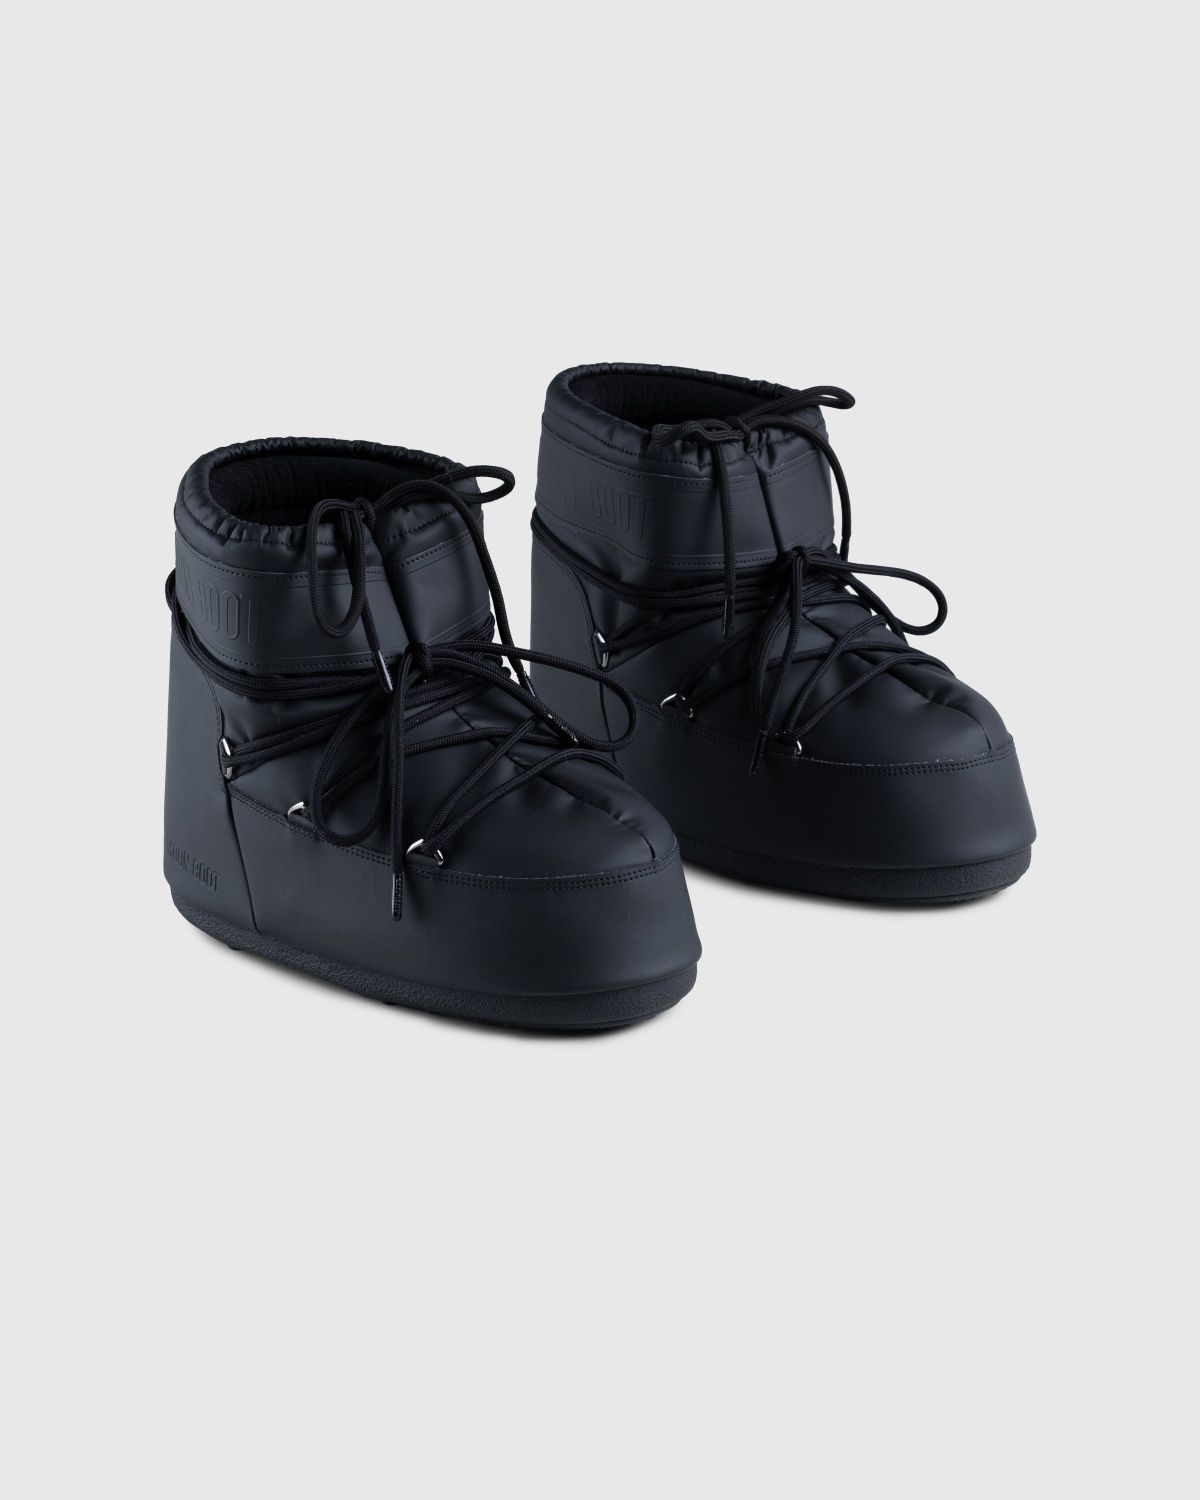 Moon Boot Icon Low Rubber Boots